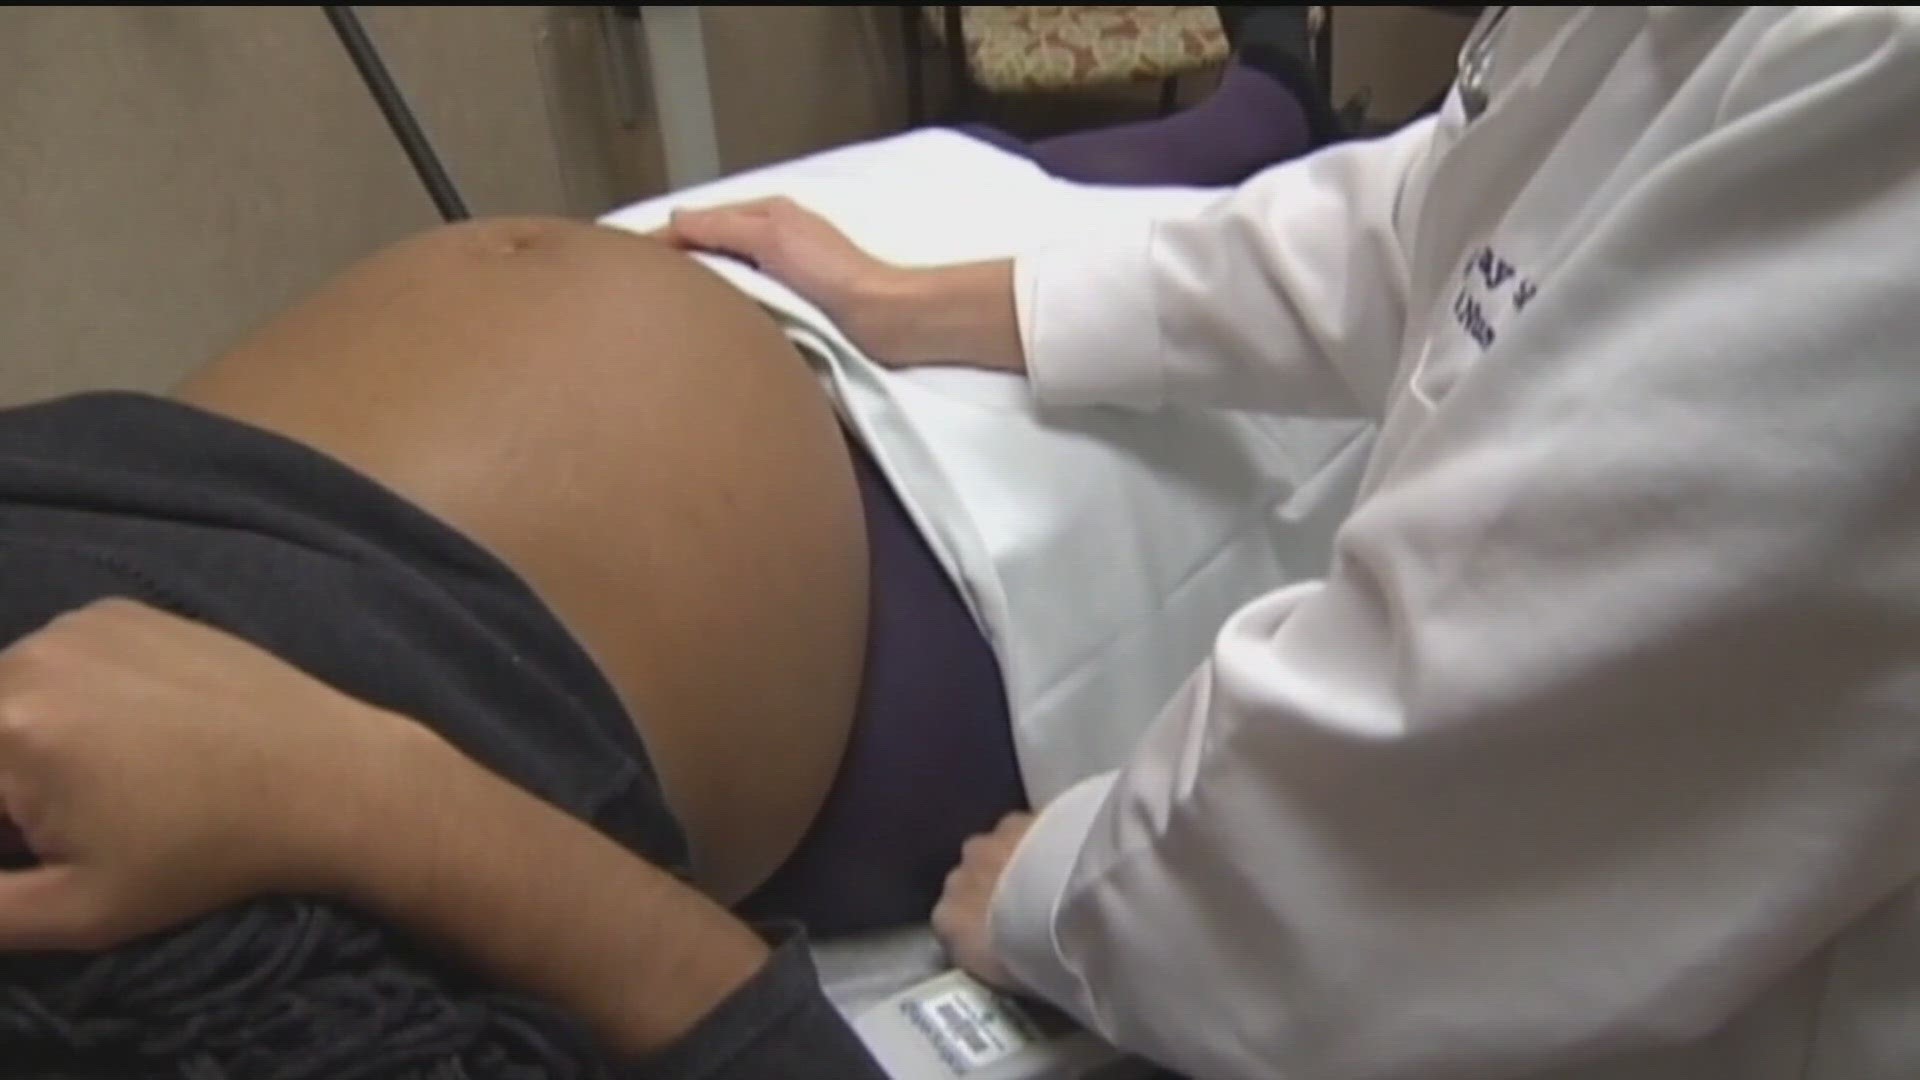 Syphilis cases among pregnant moms more than tripled in recent years, according to the CDC.